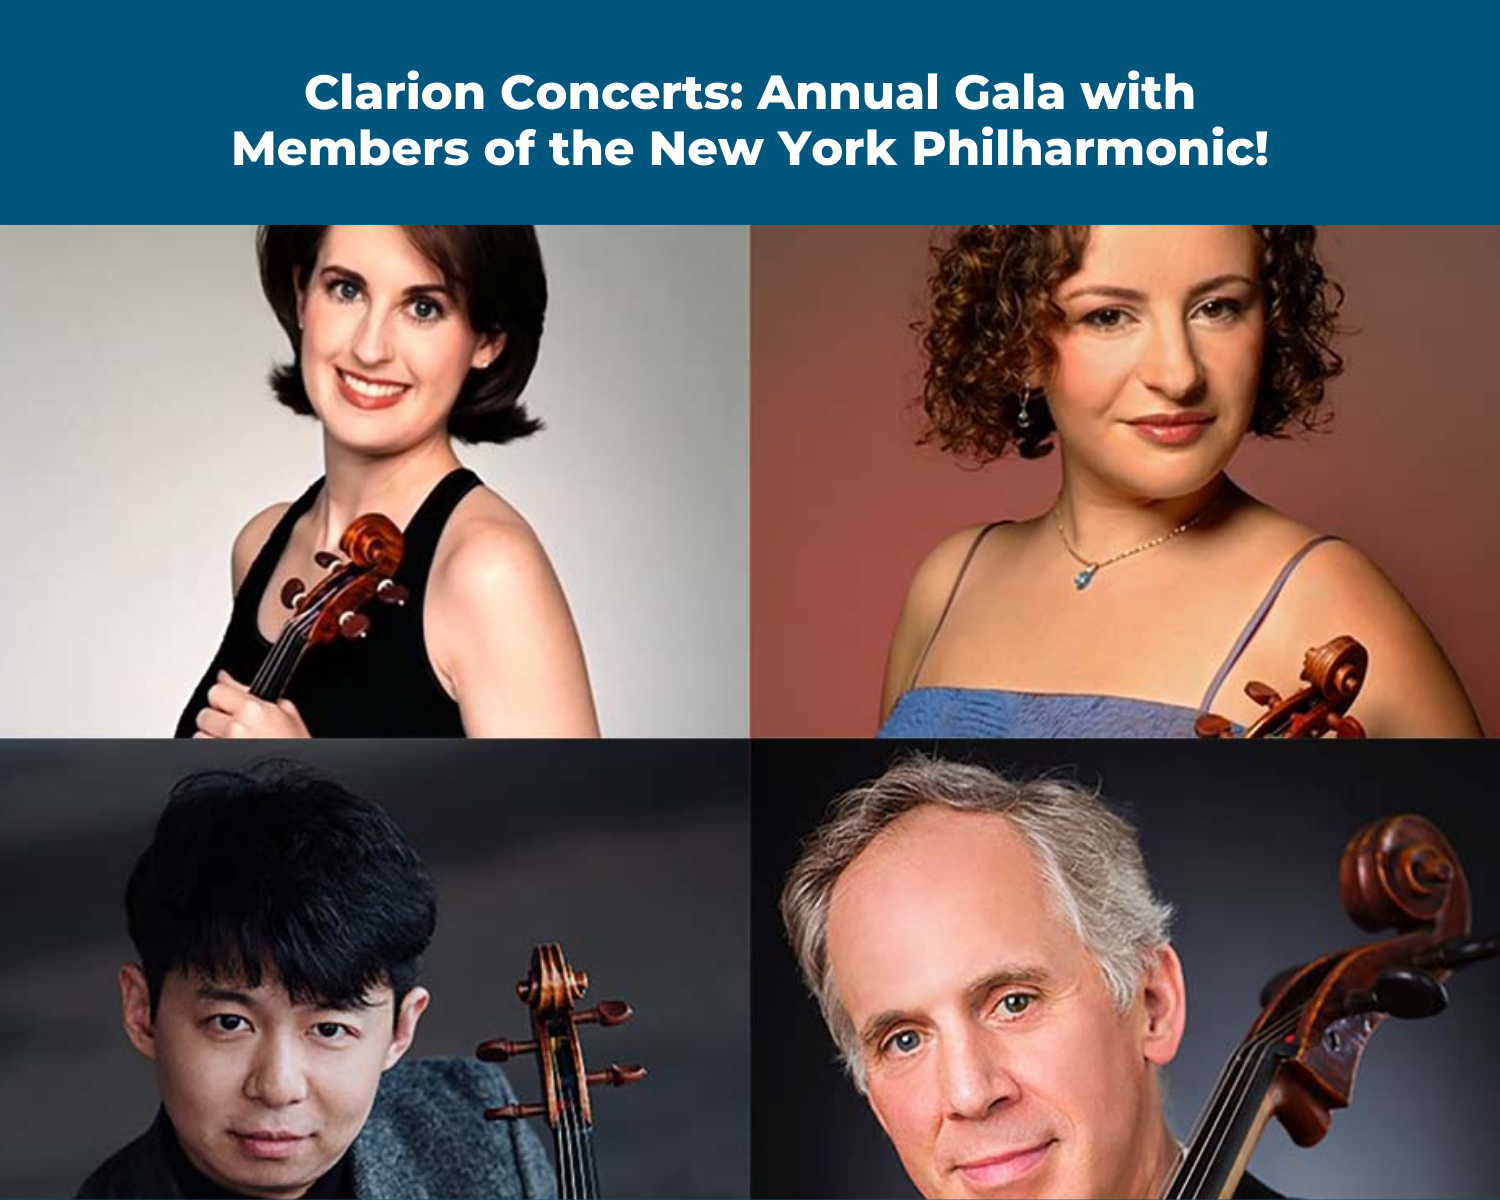 Clarion Concerts: Annual Gala with Members of the New York Philharmonic!